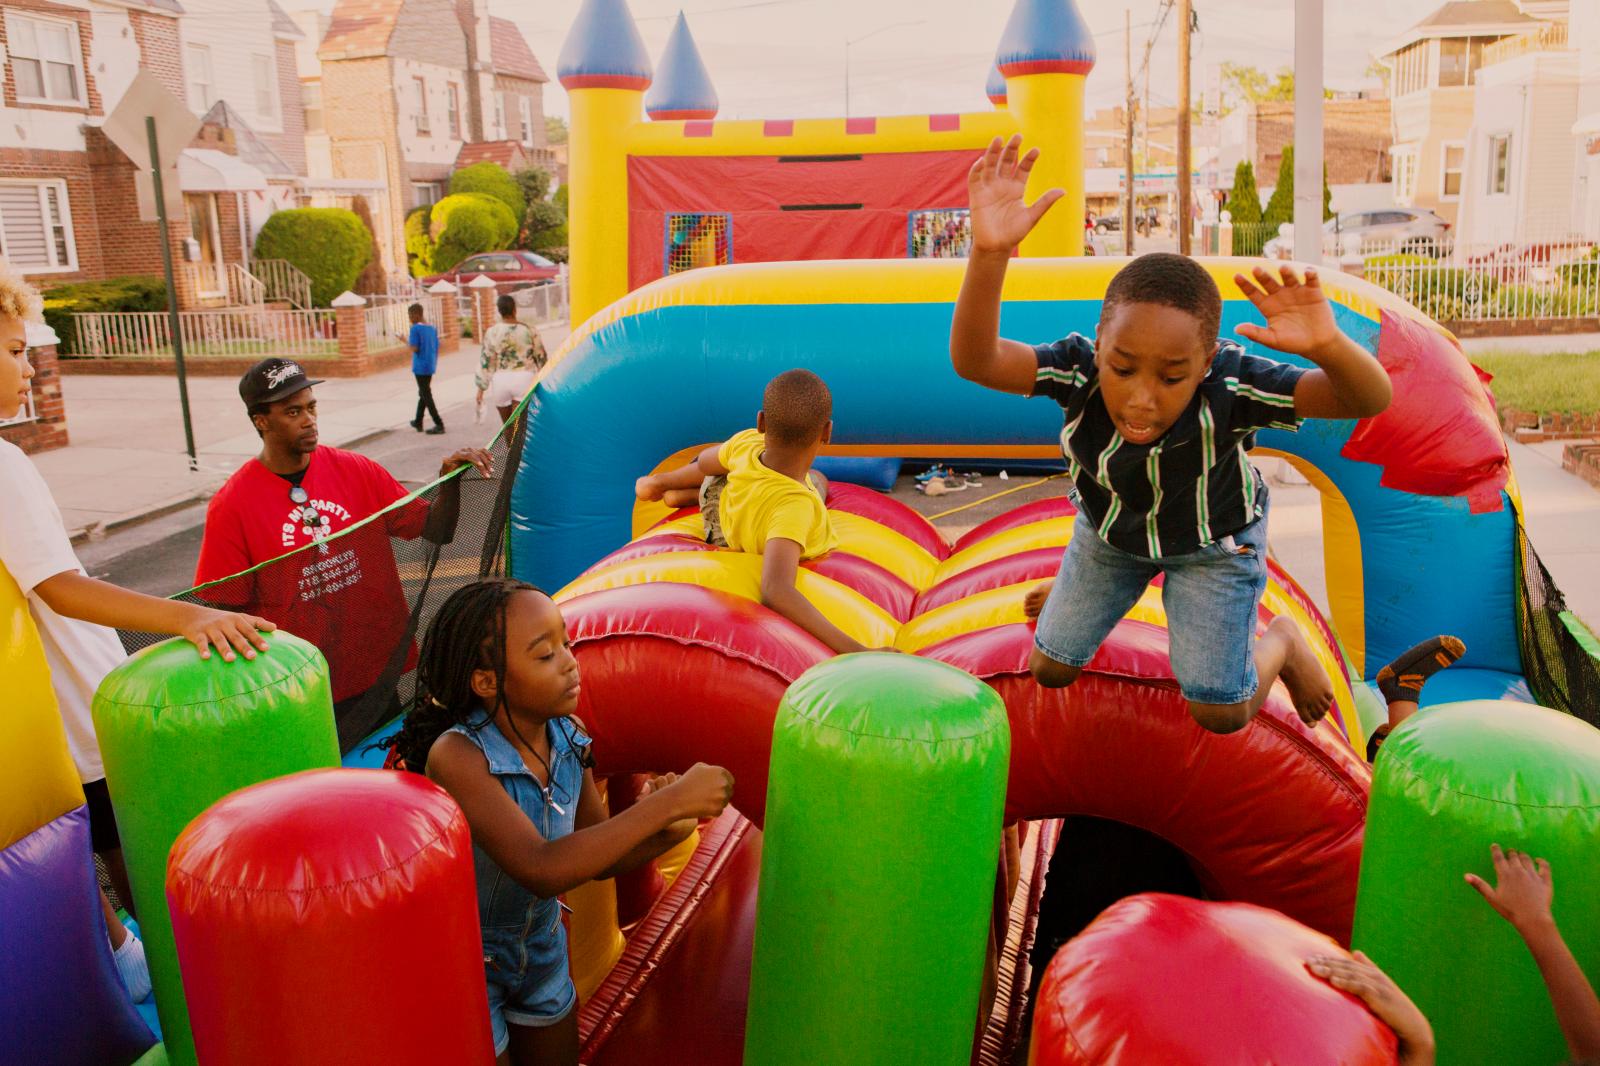 Benjamin Burton, 7, plays with inflatable obstacle course from ItsMyParty NYC during the block...